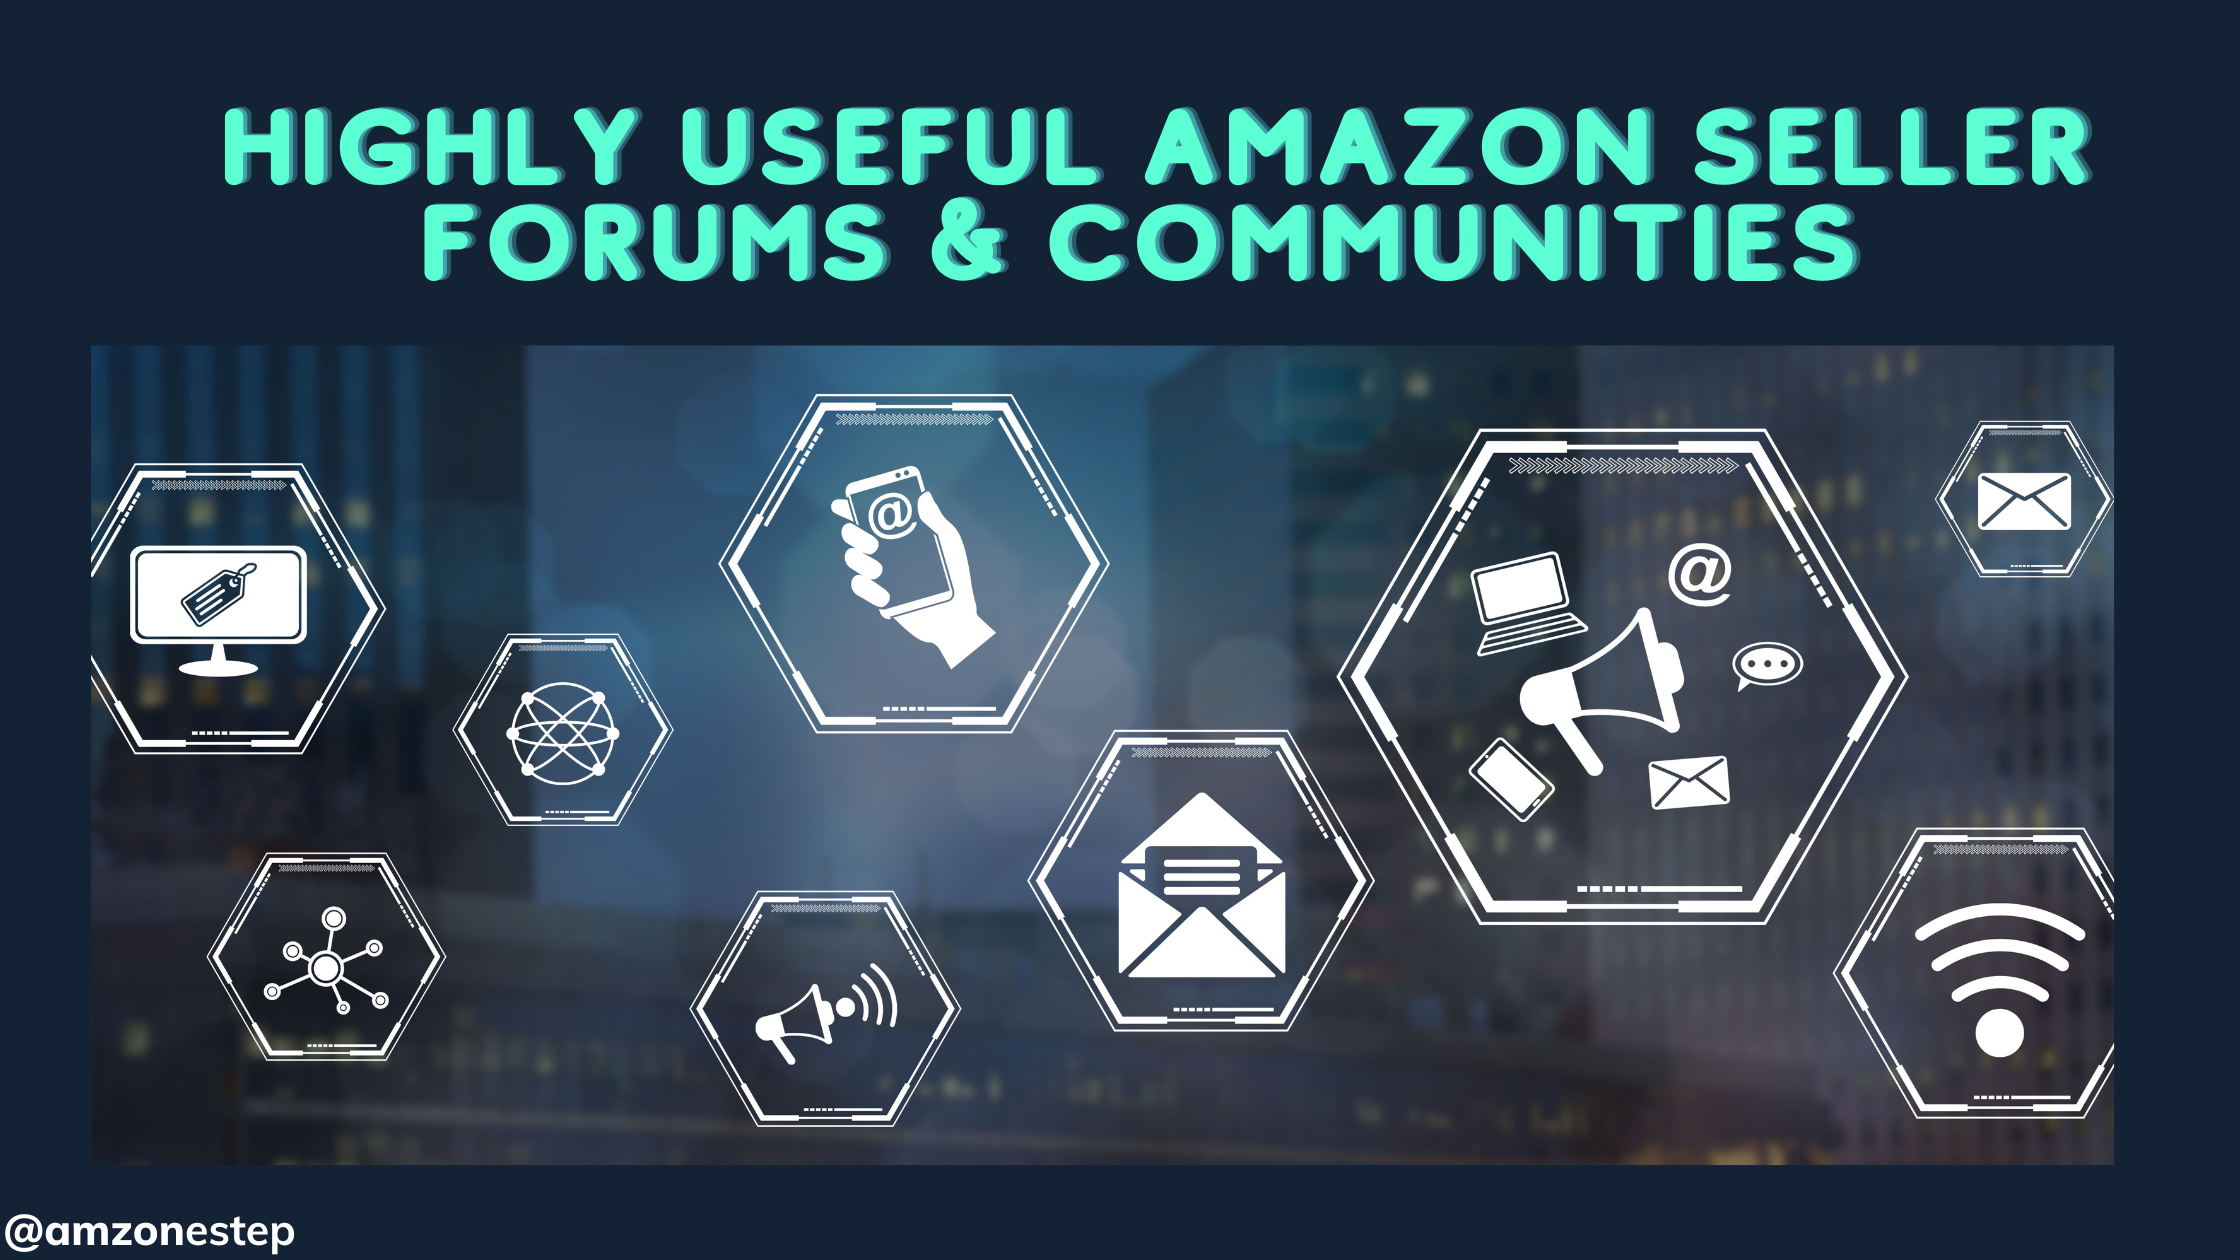 Amazon Seller Forums & Communities That Are Highly Useful